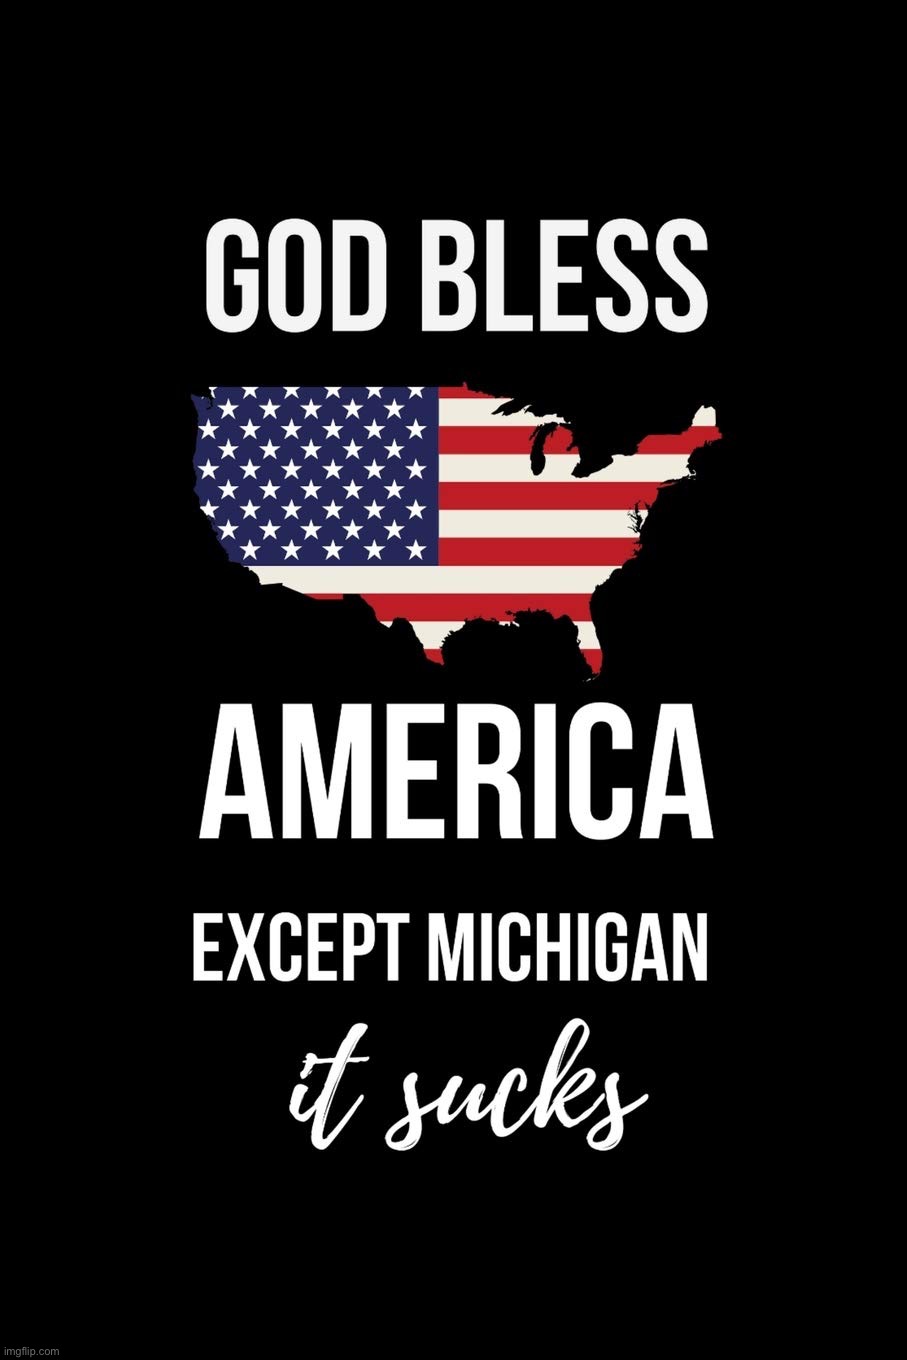 Michiganophobia | image tagged in god bless america except michigan it sucks,michiganophobia | made w/ Imgflip meme maker